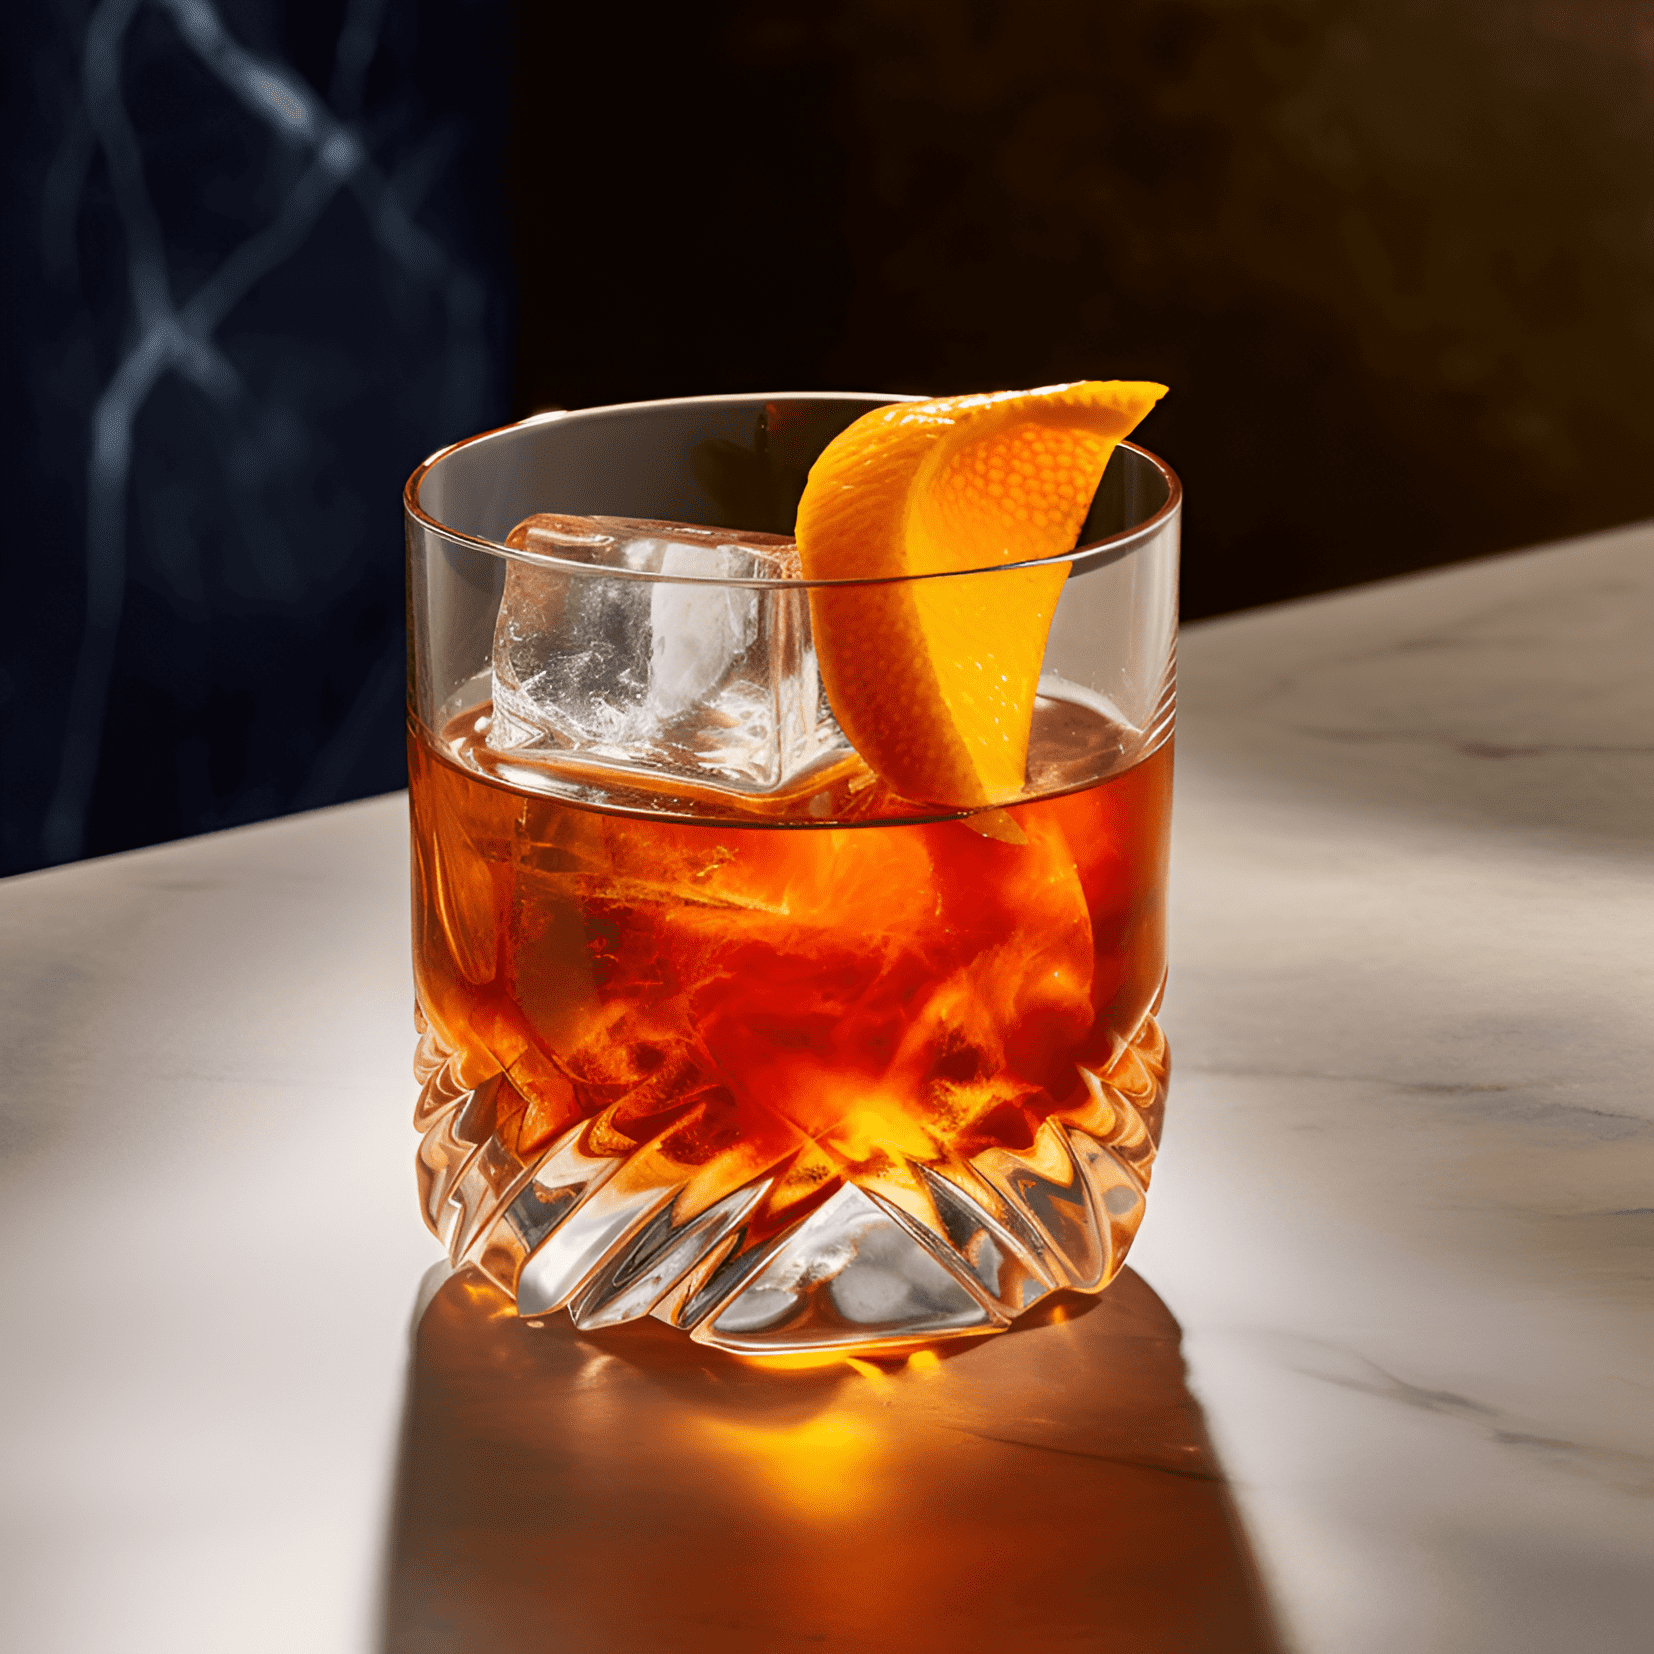 Toronto Cocktail Recipe - The Toronto cocktail is a rich, bold, and slightly sweet drink with a hint of bitterness from the Fernet-Branca. The rye whiskey provides a strong, spicy backbone, while the simple syrup and orange peel garnish add a touch of sweetness and citrus.